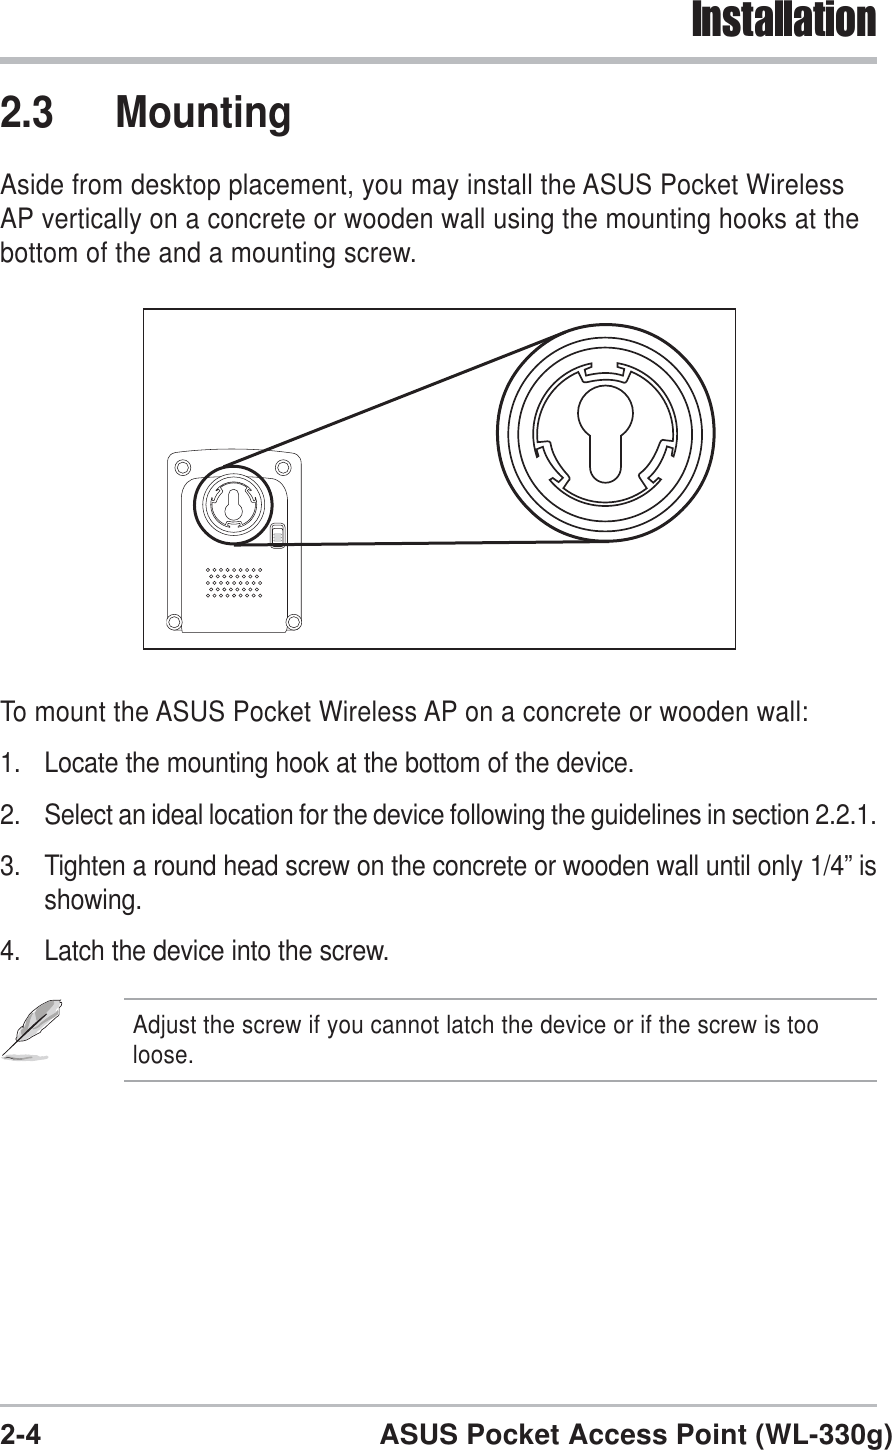 2-4 ASUS Pocket Access Point (WL-330g)Installation2.3 MountingAside from desktop placement, you may install the ASUS Pocket WirelessAP vertically on a concrete or wooden wall using the mounting hooks at thebottom of the and a mounting screw.To mount the ASUS Pocket Wireless AP on a concrete or wooden wall:1. Locate the mounting hook at the bottom of the device.2. Select an ideal location for the device following the guidelines in section 2.2.1.3. Tighten a round head screw on the concrete or wooden wall until only 1/4” isshowing.4. Latch the device into the screw.Adjust the screw if you cannot latch the device or if the screw is tooloose.